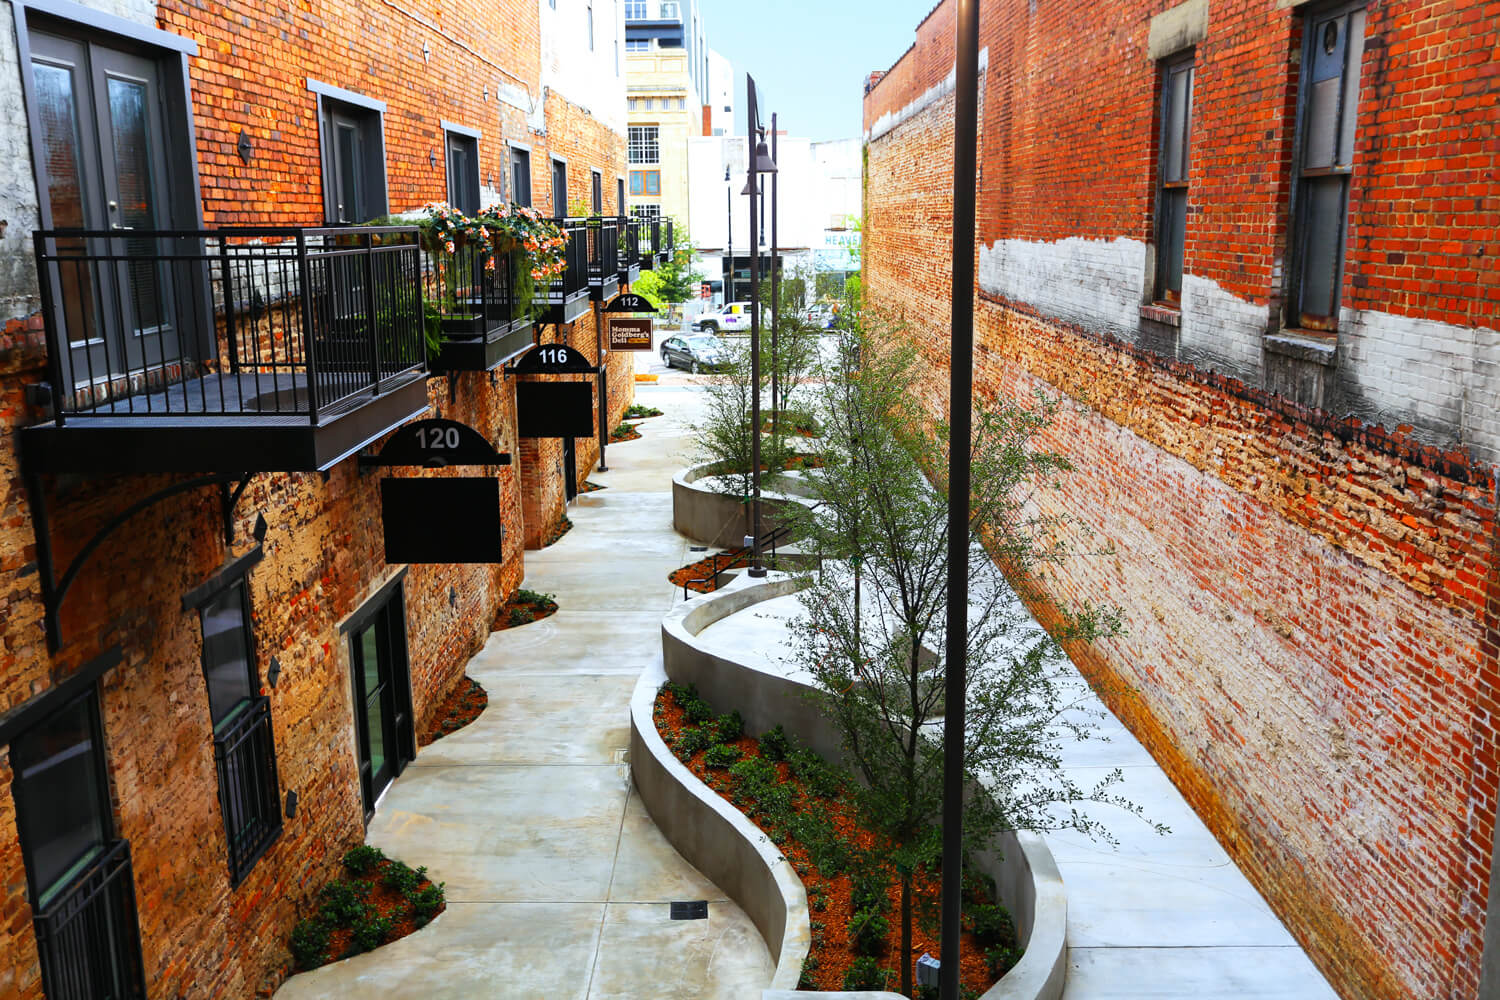 Dexter Alley Park Designed by Foshee Multifamily Architecture - Exterior Aerial View